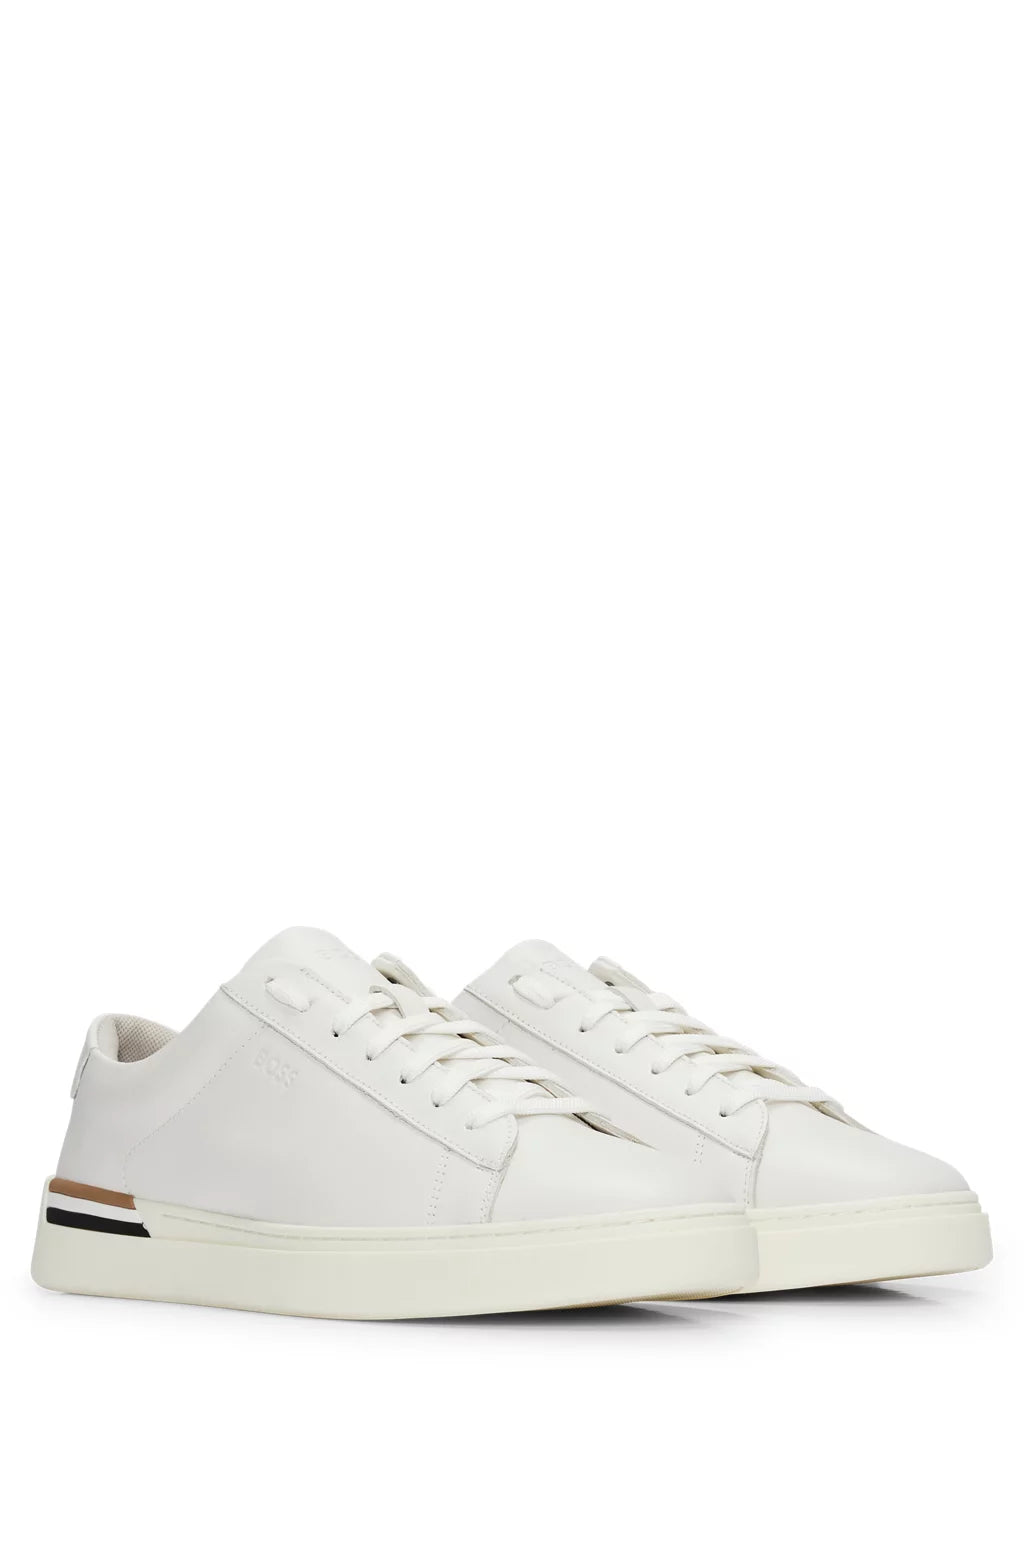 BOSS- CLINT_TENN White Leather Cupsole Trainers 50502885 100